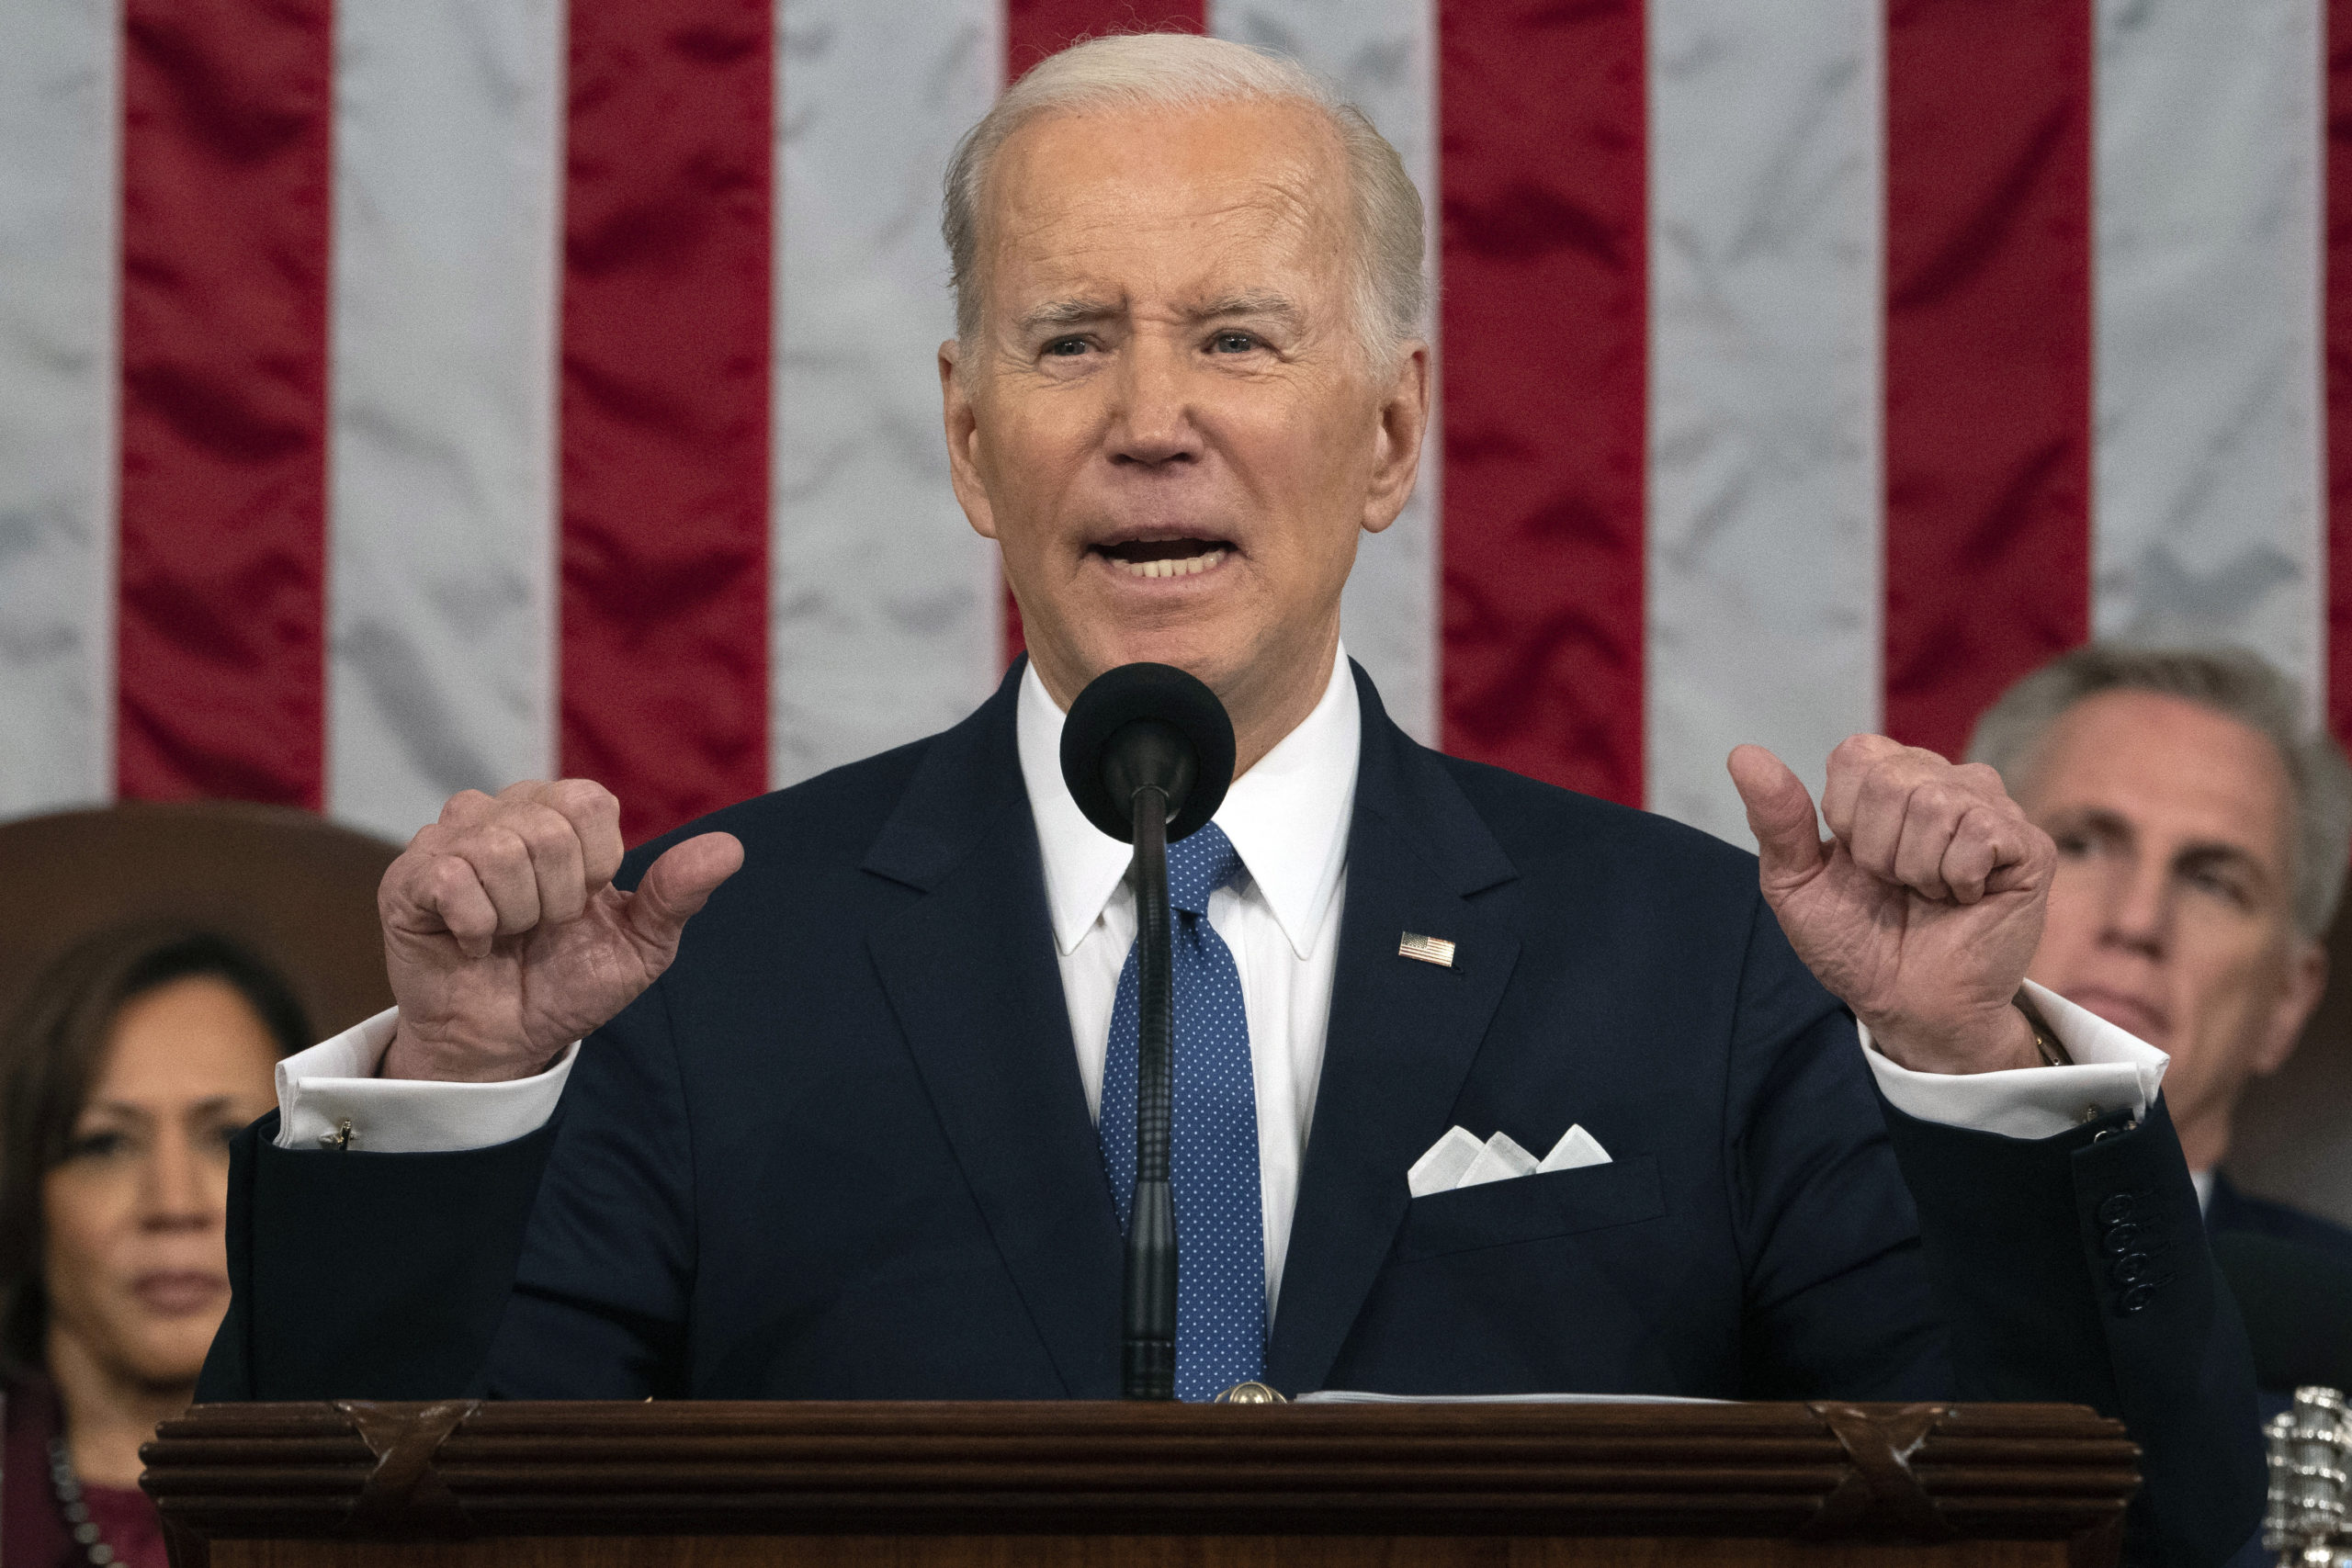 President Joe Biden gestures during Tuesday night's State of the Union address in Washington, D.C.